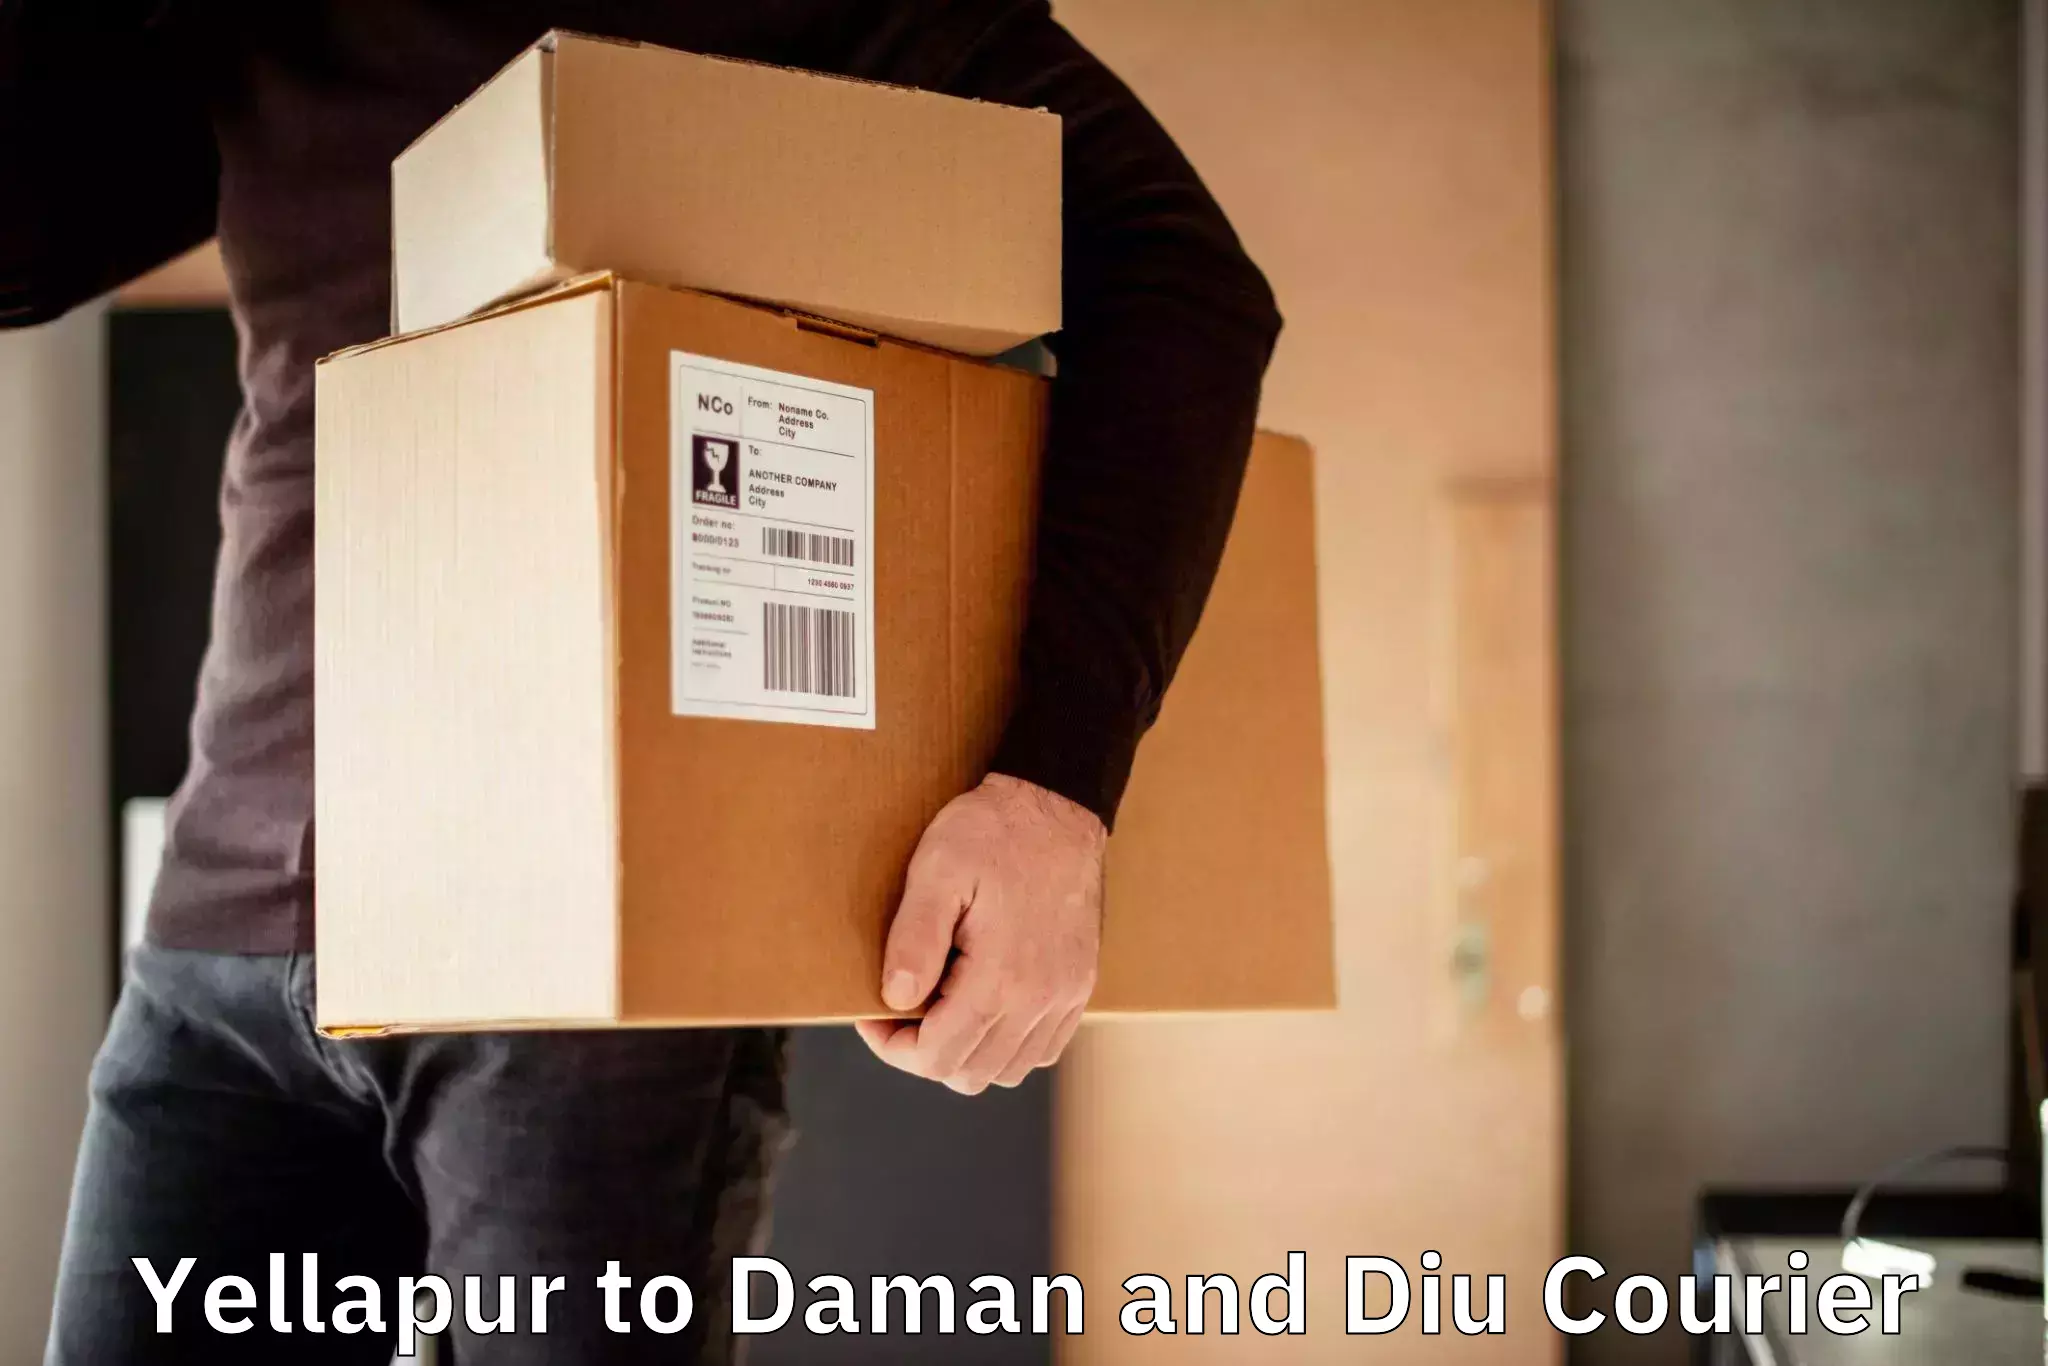 Express delivery capabilities Yellapur to Daman and Diu